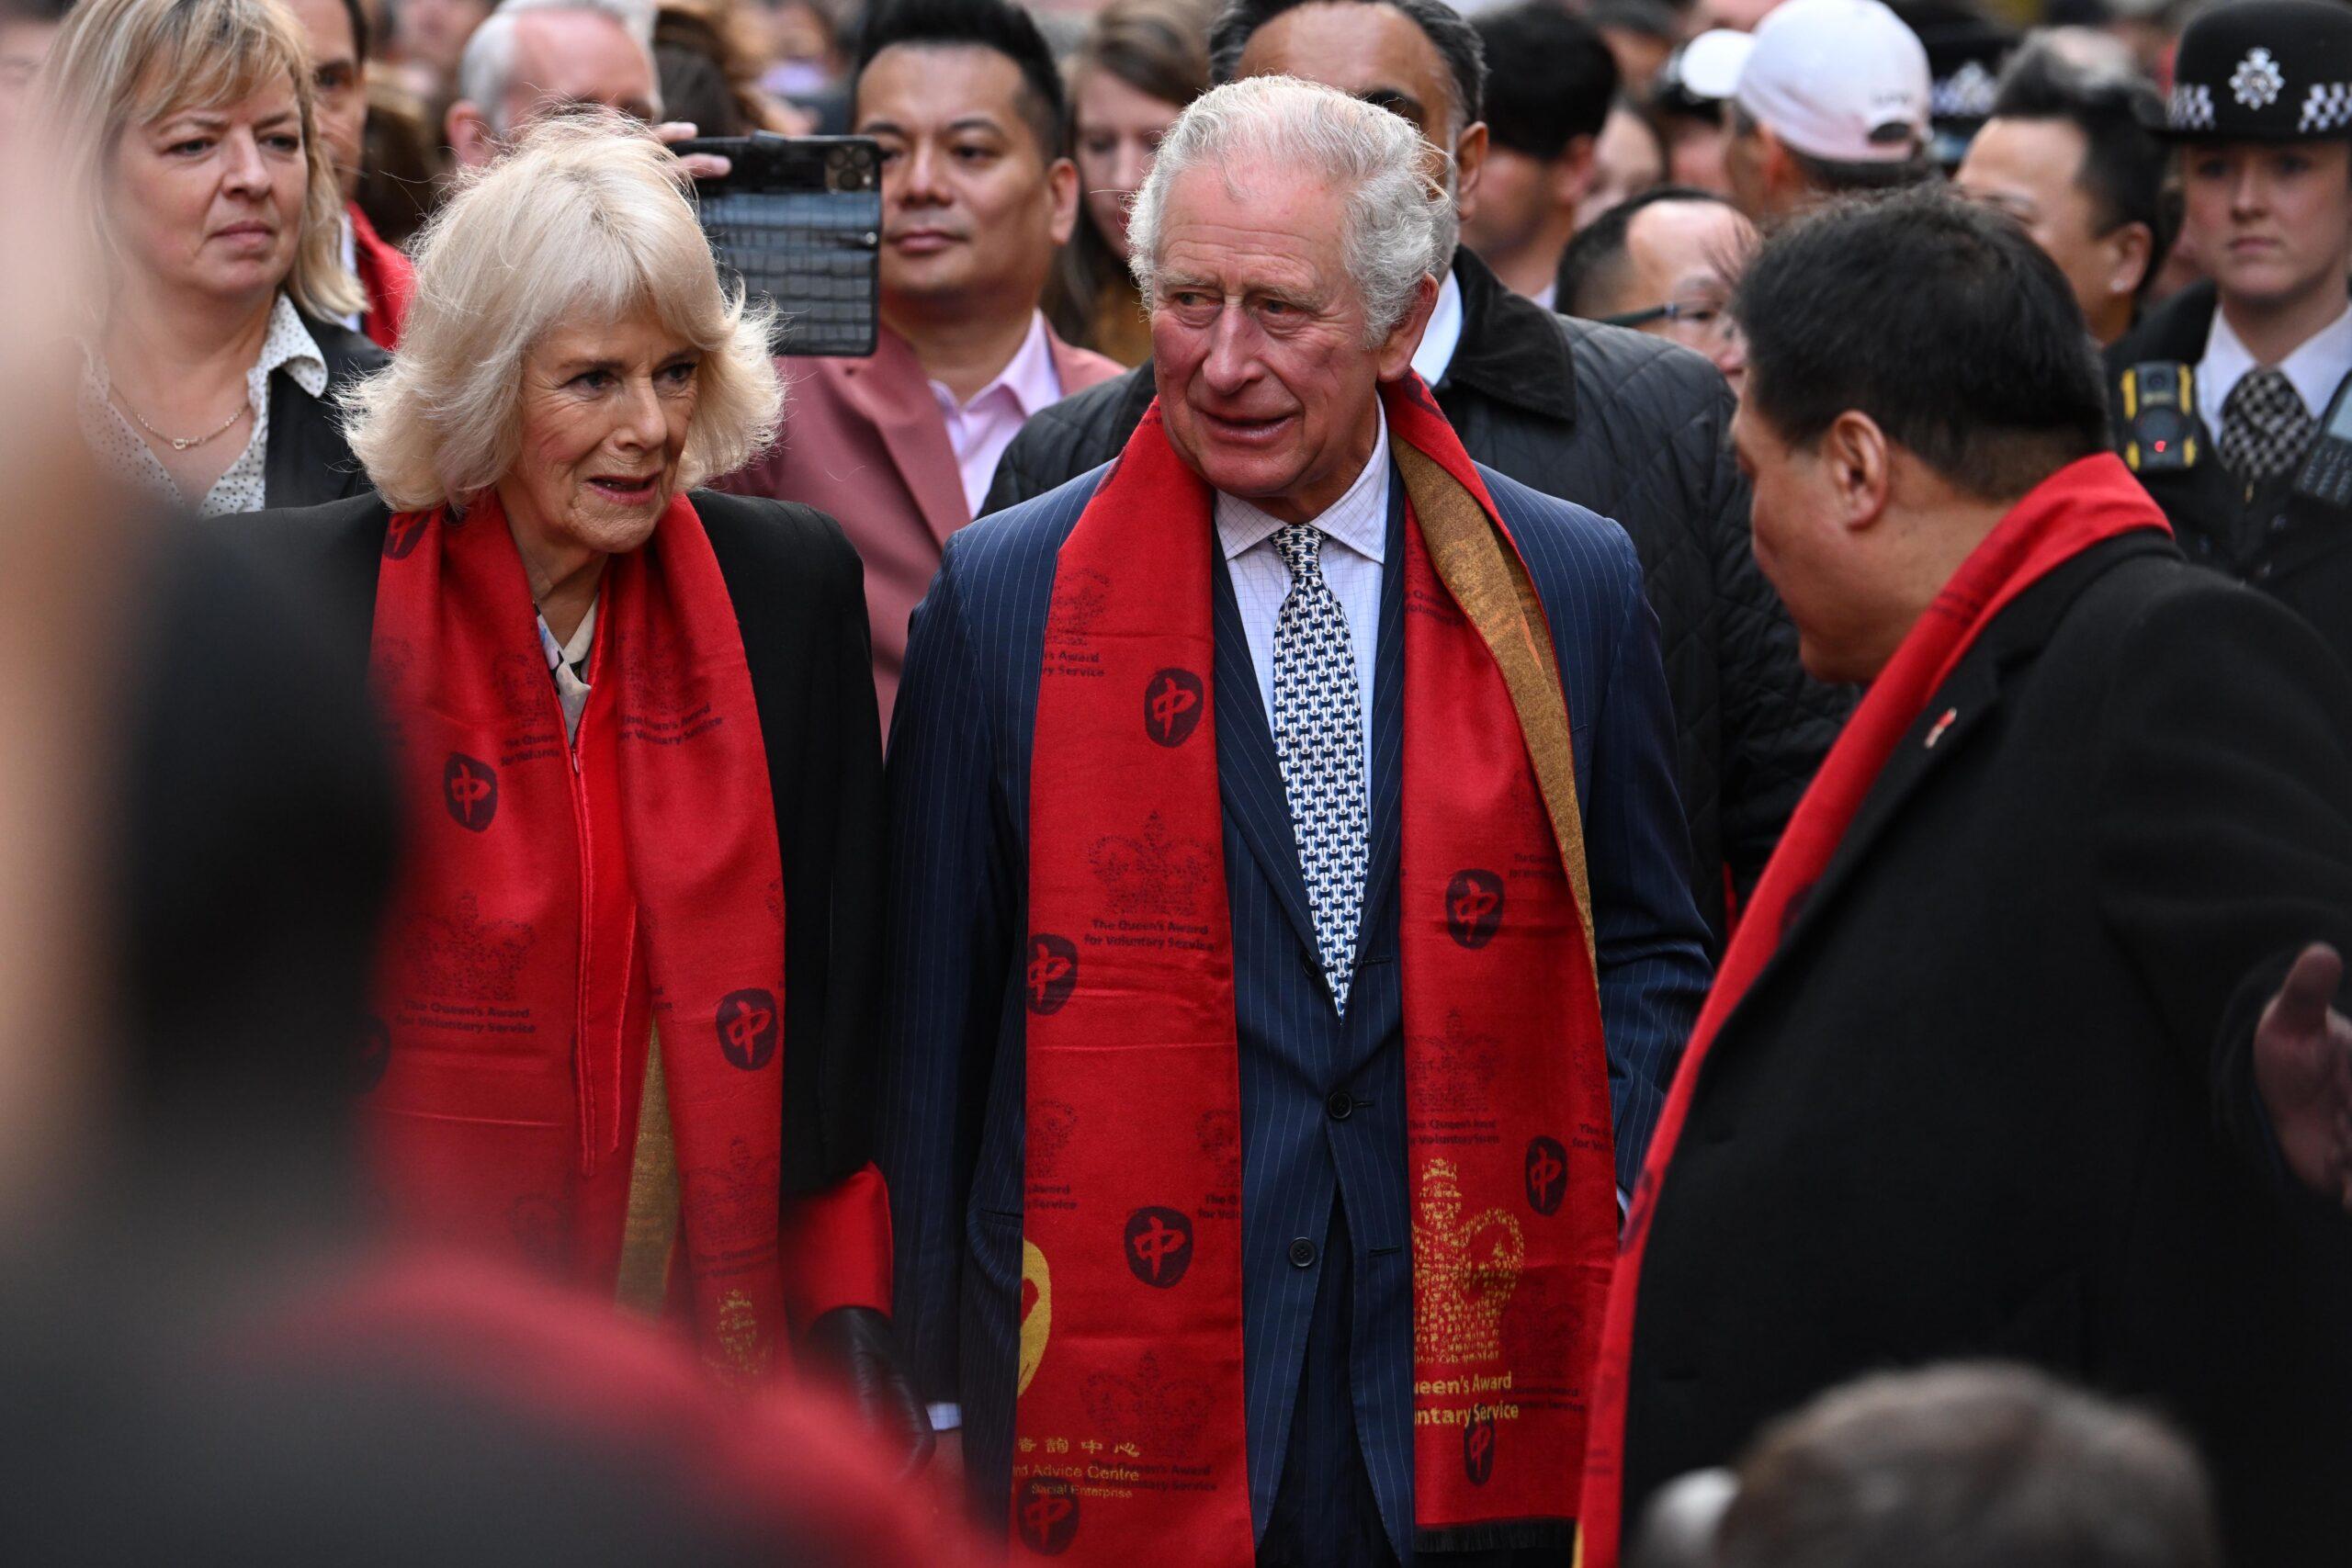 Prince Charles and Camilla Parker Bowles seen arriving in Chinatown on the first day of the Chinese New Year